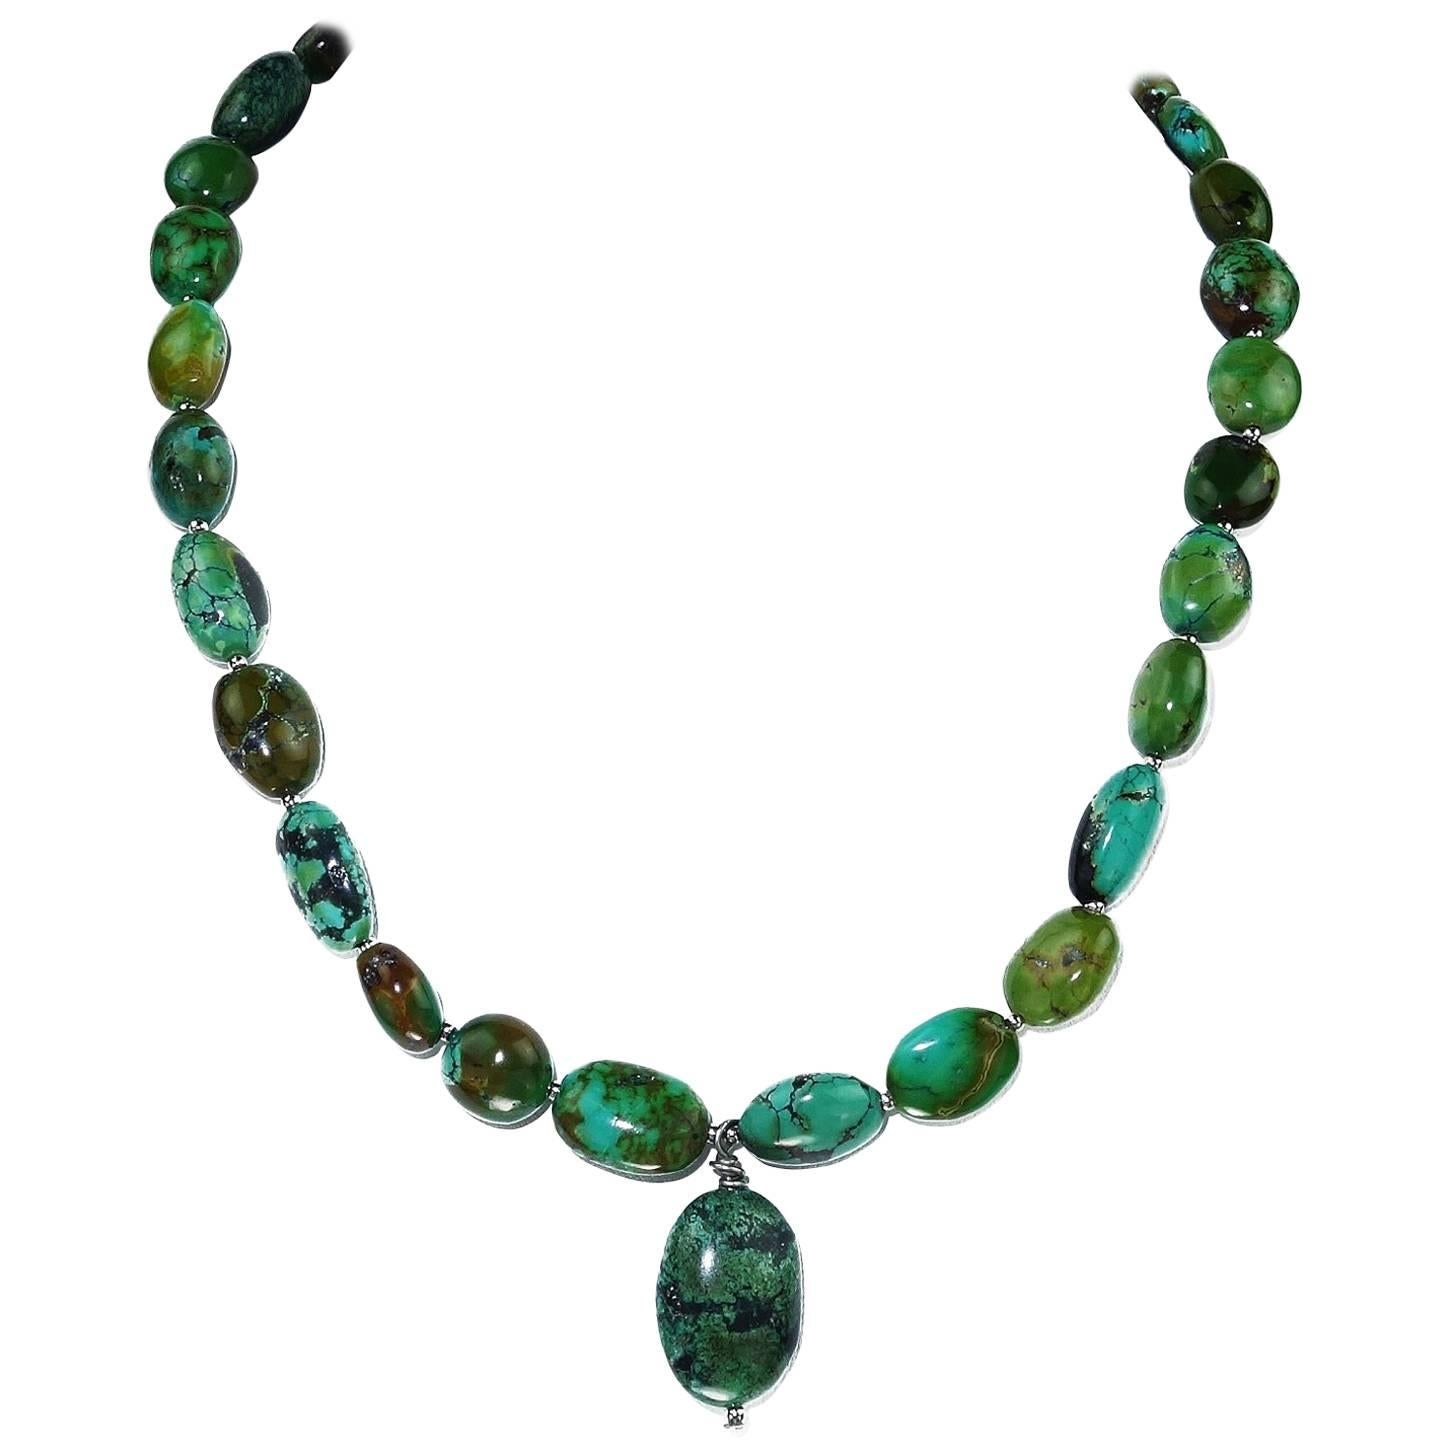 Graduated Green Turquoise in Matrix Necklace